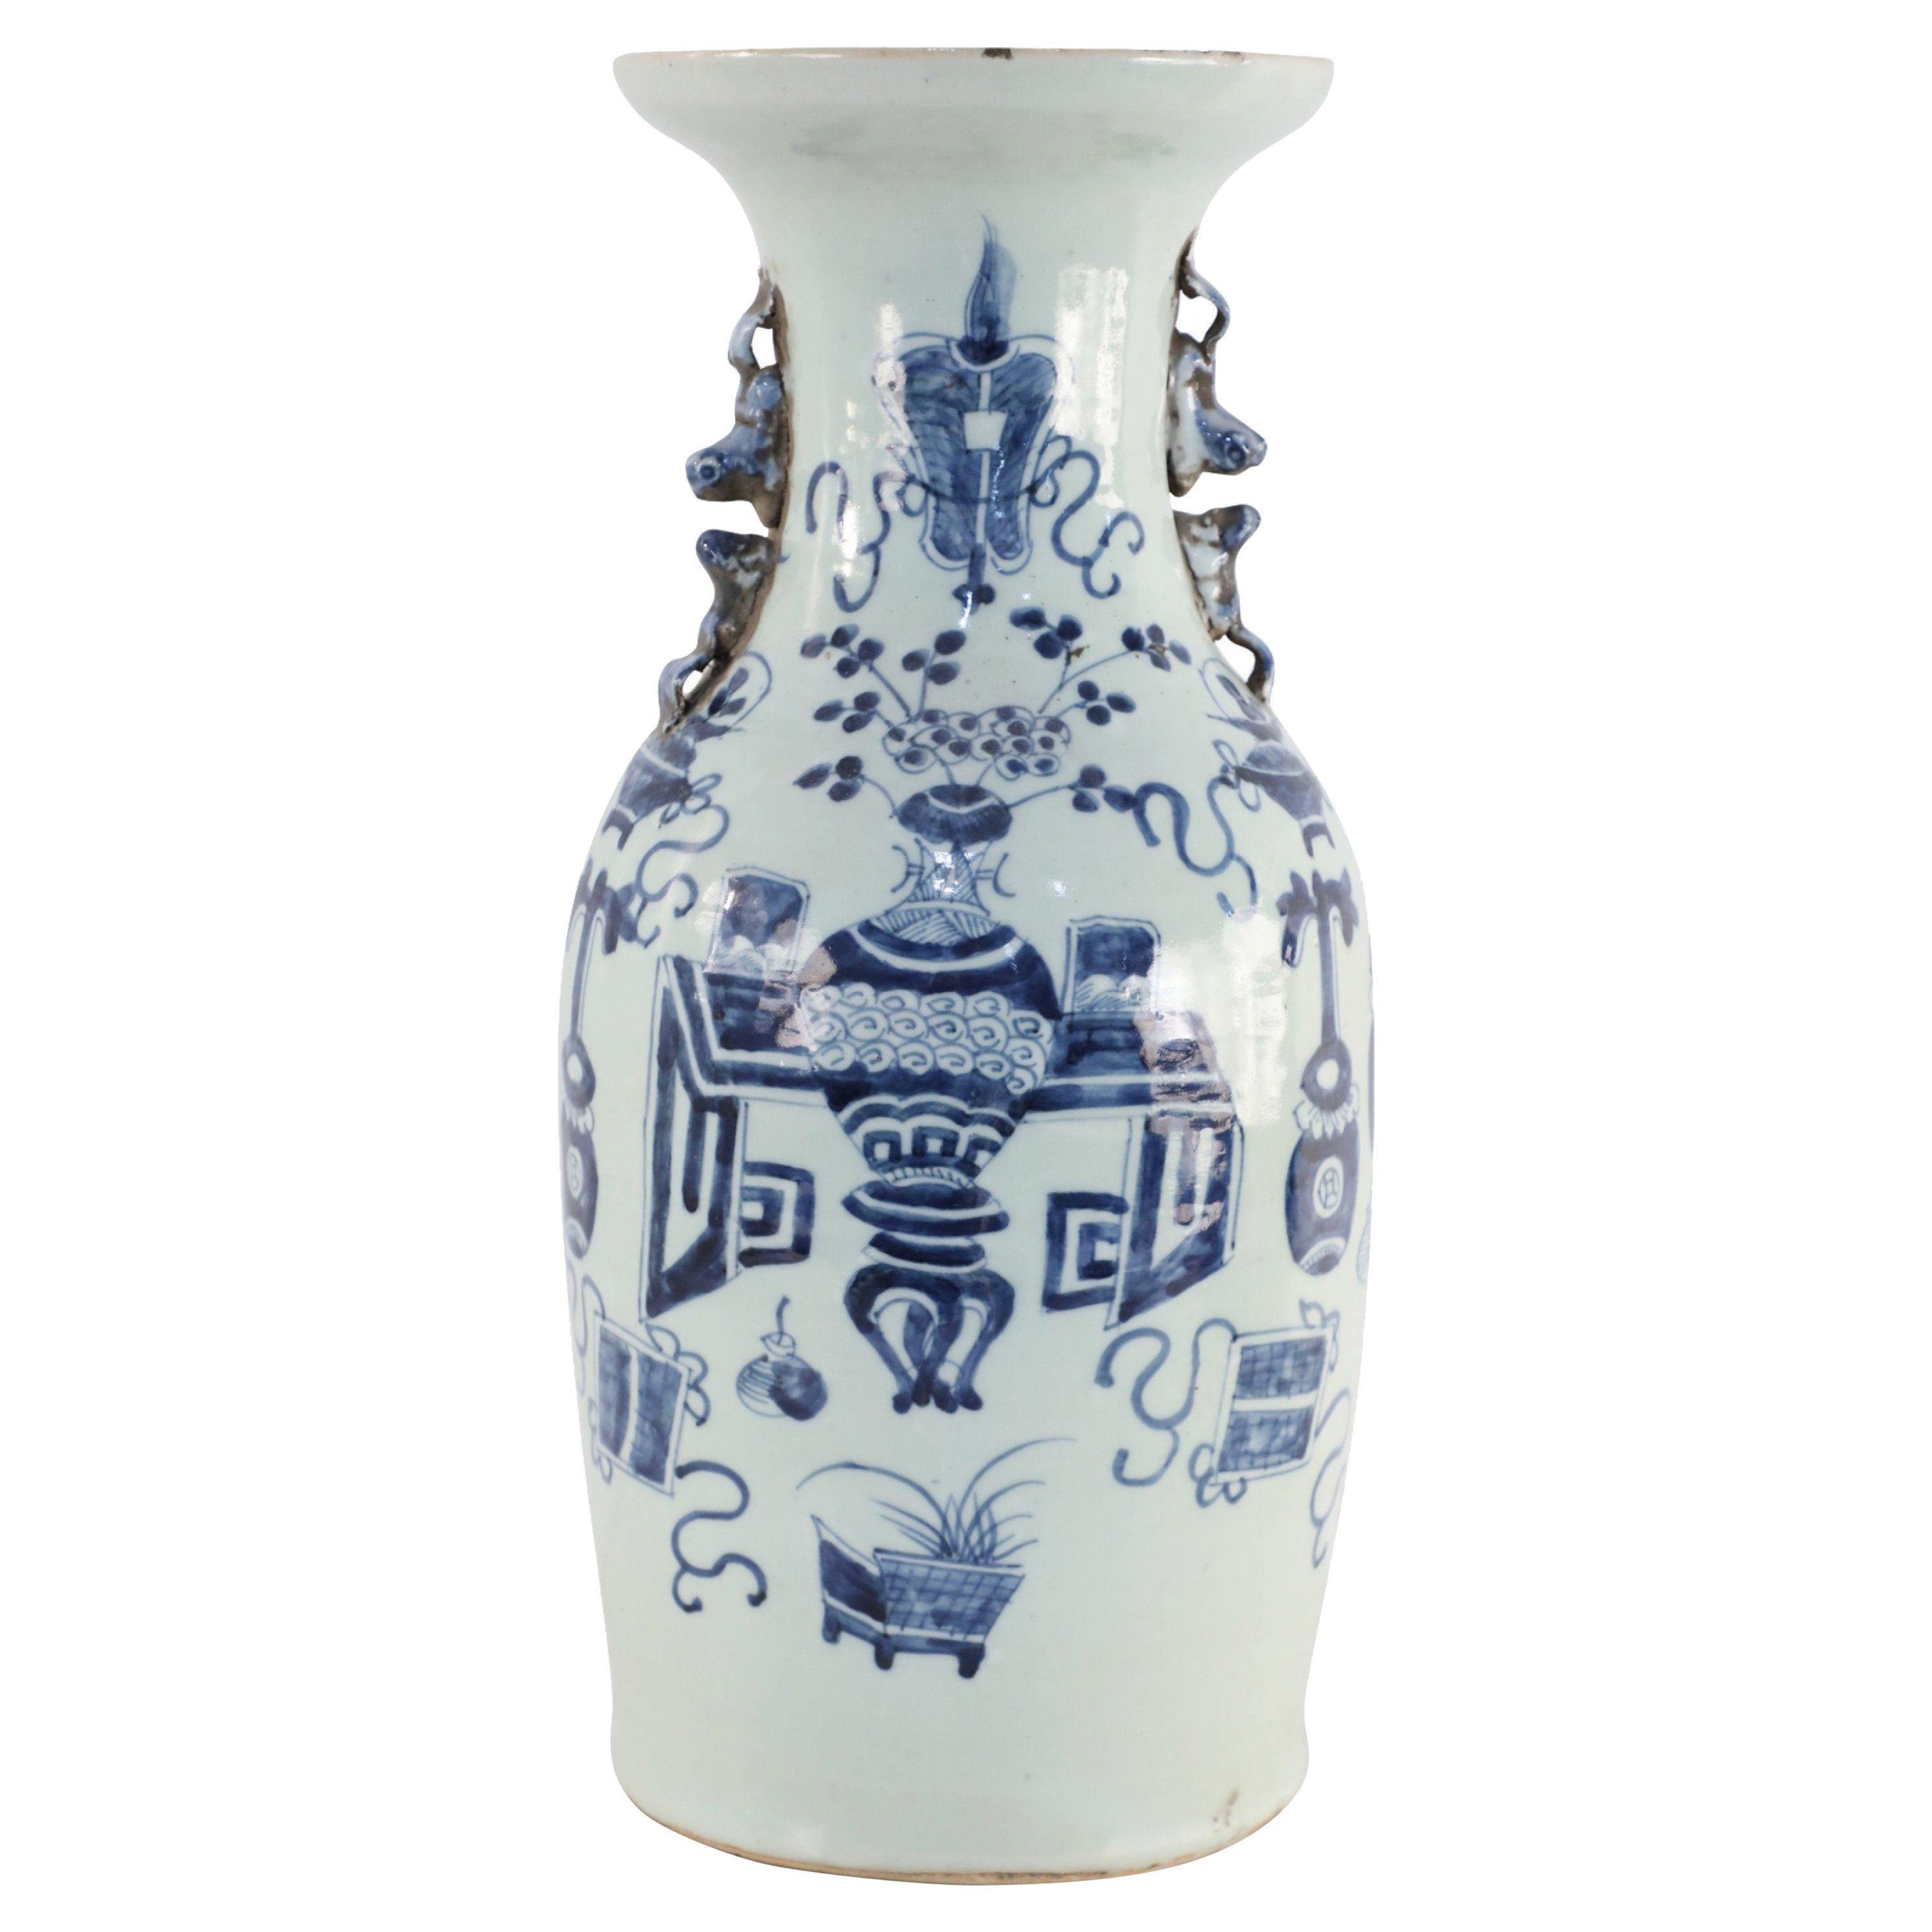 Chinese White and Navy Blue Patterned Handled Porcelain Urn